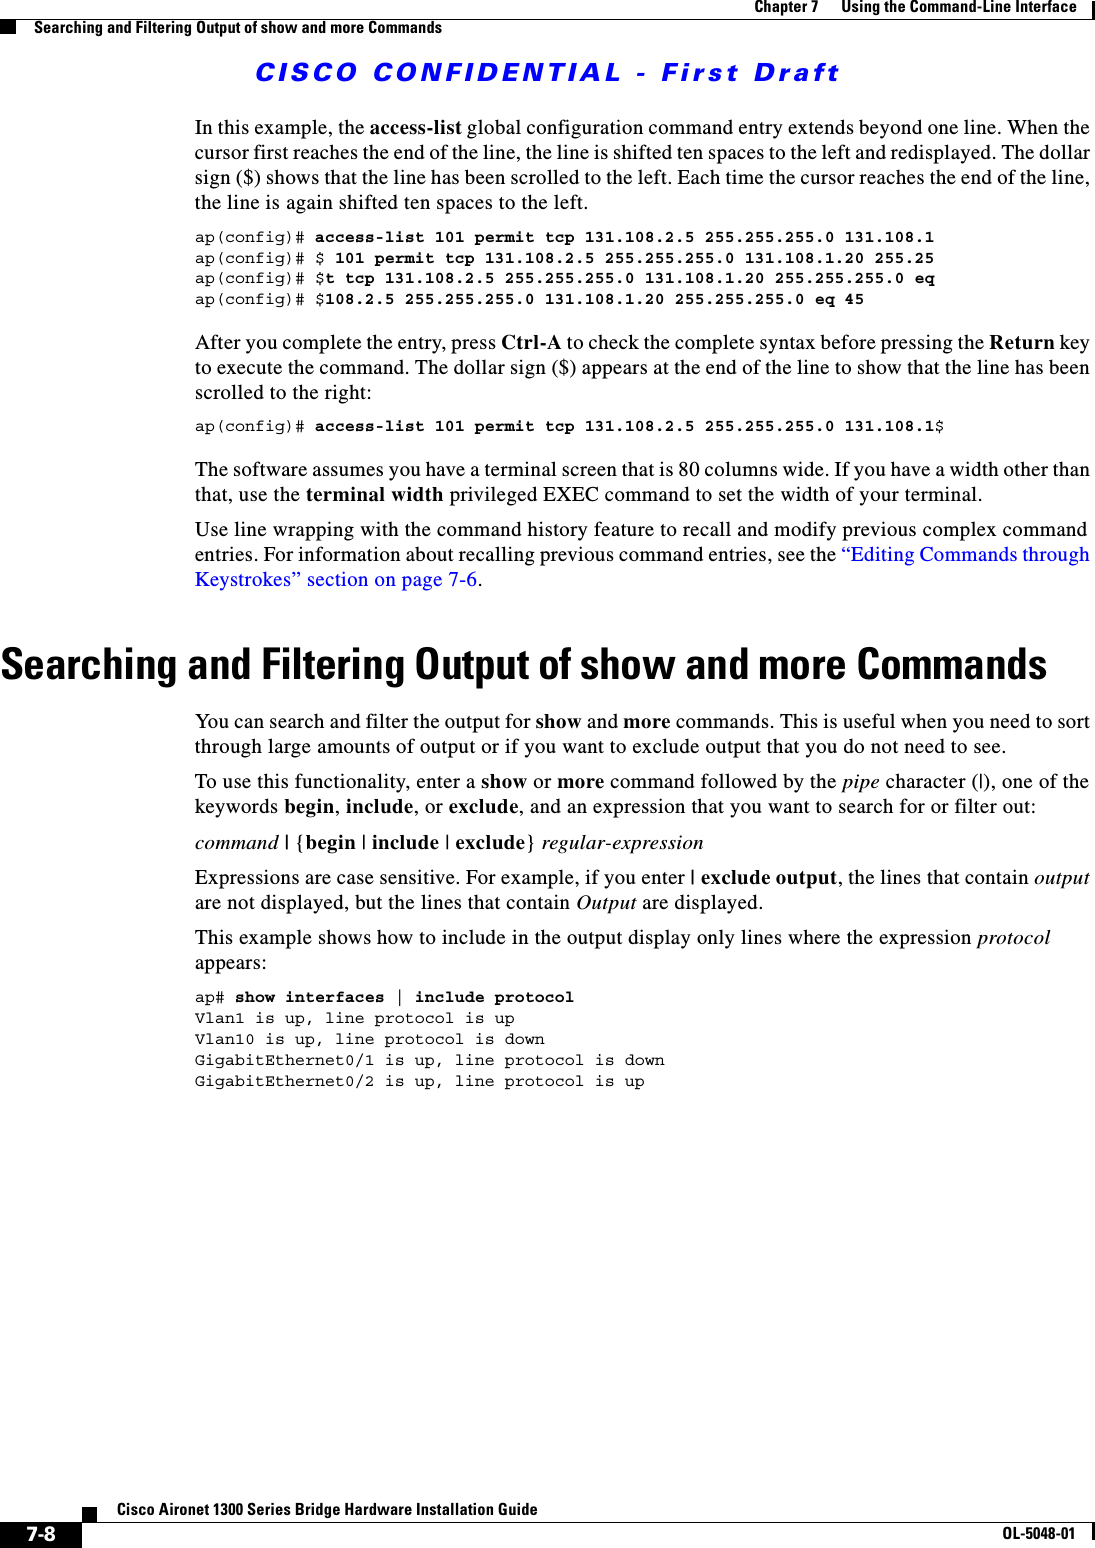 CISCO CONFIDENTIAL - First Draft7-8Cisco Aironet 1300 Series Bridge Hardware Installation GuideOL-5048-01Chapter 7      Using the Command-Line InterfaceSearching and Filtering Output of show and more CommandsIn this example, the access-list global configuration command entry extends beyond one line. When the cursor first reaches the end of the line, the line is shifted ten spaces to the left and redisplayed. The dollar sign ($) shows that the line has been scrolled to the left. Each time the cursor reaches the end of the line, the line is again shifted ten spaces to the left. ap(config)# access-list 101 permit tcp 131.108.2.5 255.255.255.0 131.108.1ap(config)# $ 101 permit tcp 131.108.2.5 255.255.255.0 131.108.1.20 255.25ap(config)# $t tcp 131.108.2.5 255.255.255.0 131.108.1.20 255.255.255.0 eqap(config)# $108.2.5 255.255.255.0 131.108.1.20 255.255.255.0 eq 45 After you complete the entry, press Ctrl-A to check the complete syntax before pressing the Return key to execute the command. The dollar sign ($) appears at the end of the line to show that the line has been scrolled to the right:ap(config)# access-list 101 permit tcp 131.108.2.5 255.255.255.0 131.108.1$The software assumes you have a terminal screen that is 80 columns wide. If you have a width other than that, use the terminal width privileged EXEC command to set the width of your terminal.Use line wrapping with the command history feature to recall and modify previous complex command entries. For information about recalling previous command entries, see the “Editing Commands through Keystrokes” section on page 7-6.Searching and Filtering Output of show and more CommandsYou can search and filter the output for show and more commands. This is useful when you need to sort through large amounts of output or if you want to exclude output that you do not need to see.To use this functionality, enter a show or more command followed by the pipe character (|), one of the keywords begin, include, or exclude, and an expression that you want to search for or filter out:command | {begin | include | exclude} regular-expressionExpressions are case sensitive. For example, if you enter | exclude output, the lines that contain output are not displayed, but the lines that contain Output are displayed.This example shows how to include in the output display only lines where the expression protocol appears:ap# show interfaces | include protocolVlan1 is up, line protocol is upVlan10 is up, line protocol is downGigabitEthernet0/1 is up, line protocol is downGigabitEthernet0/2 is up, line protocol is up 